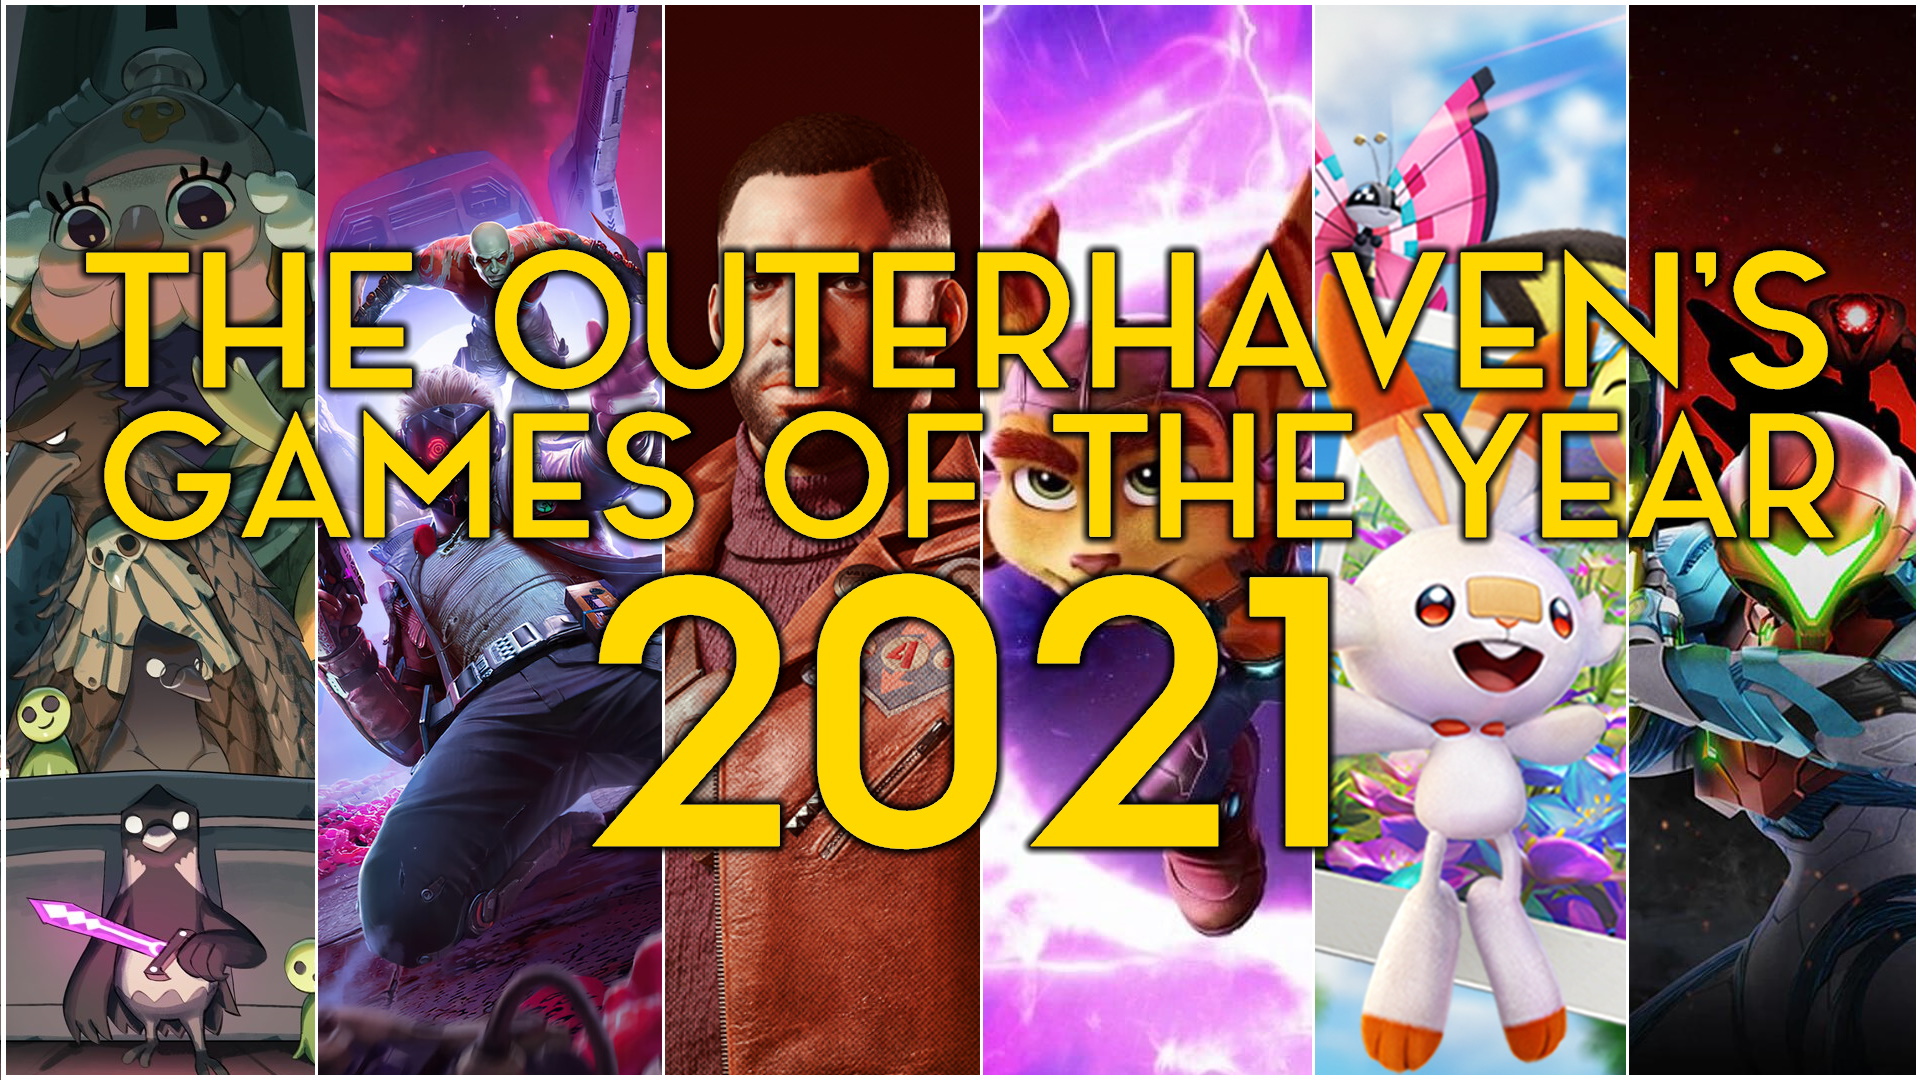 Gideon's Gaming's Game of the Year list, 2020 - Gideon's Gaming